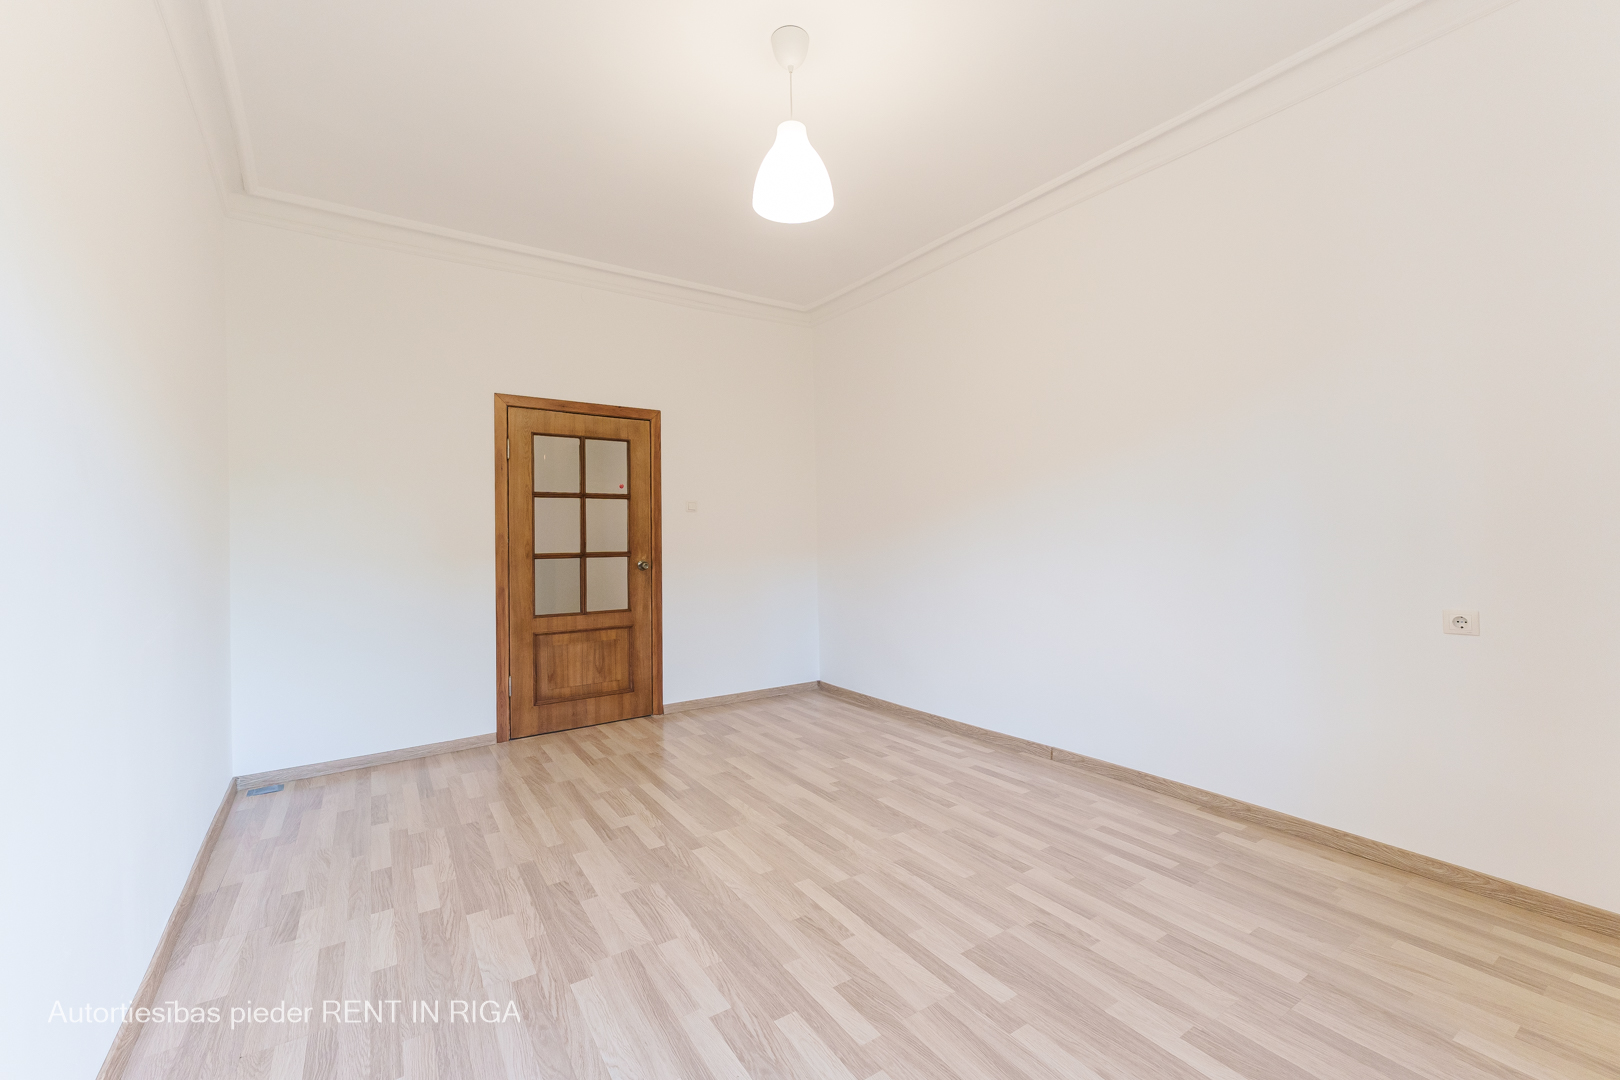 Apartment for sale, Lidoņu street 1 - Image 1